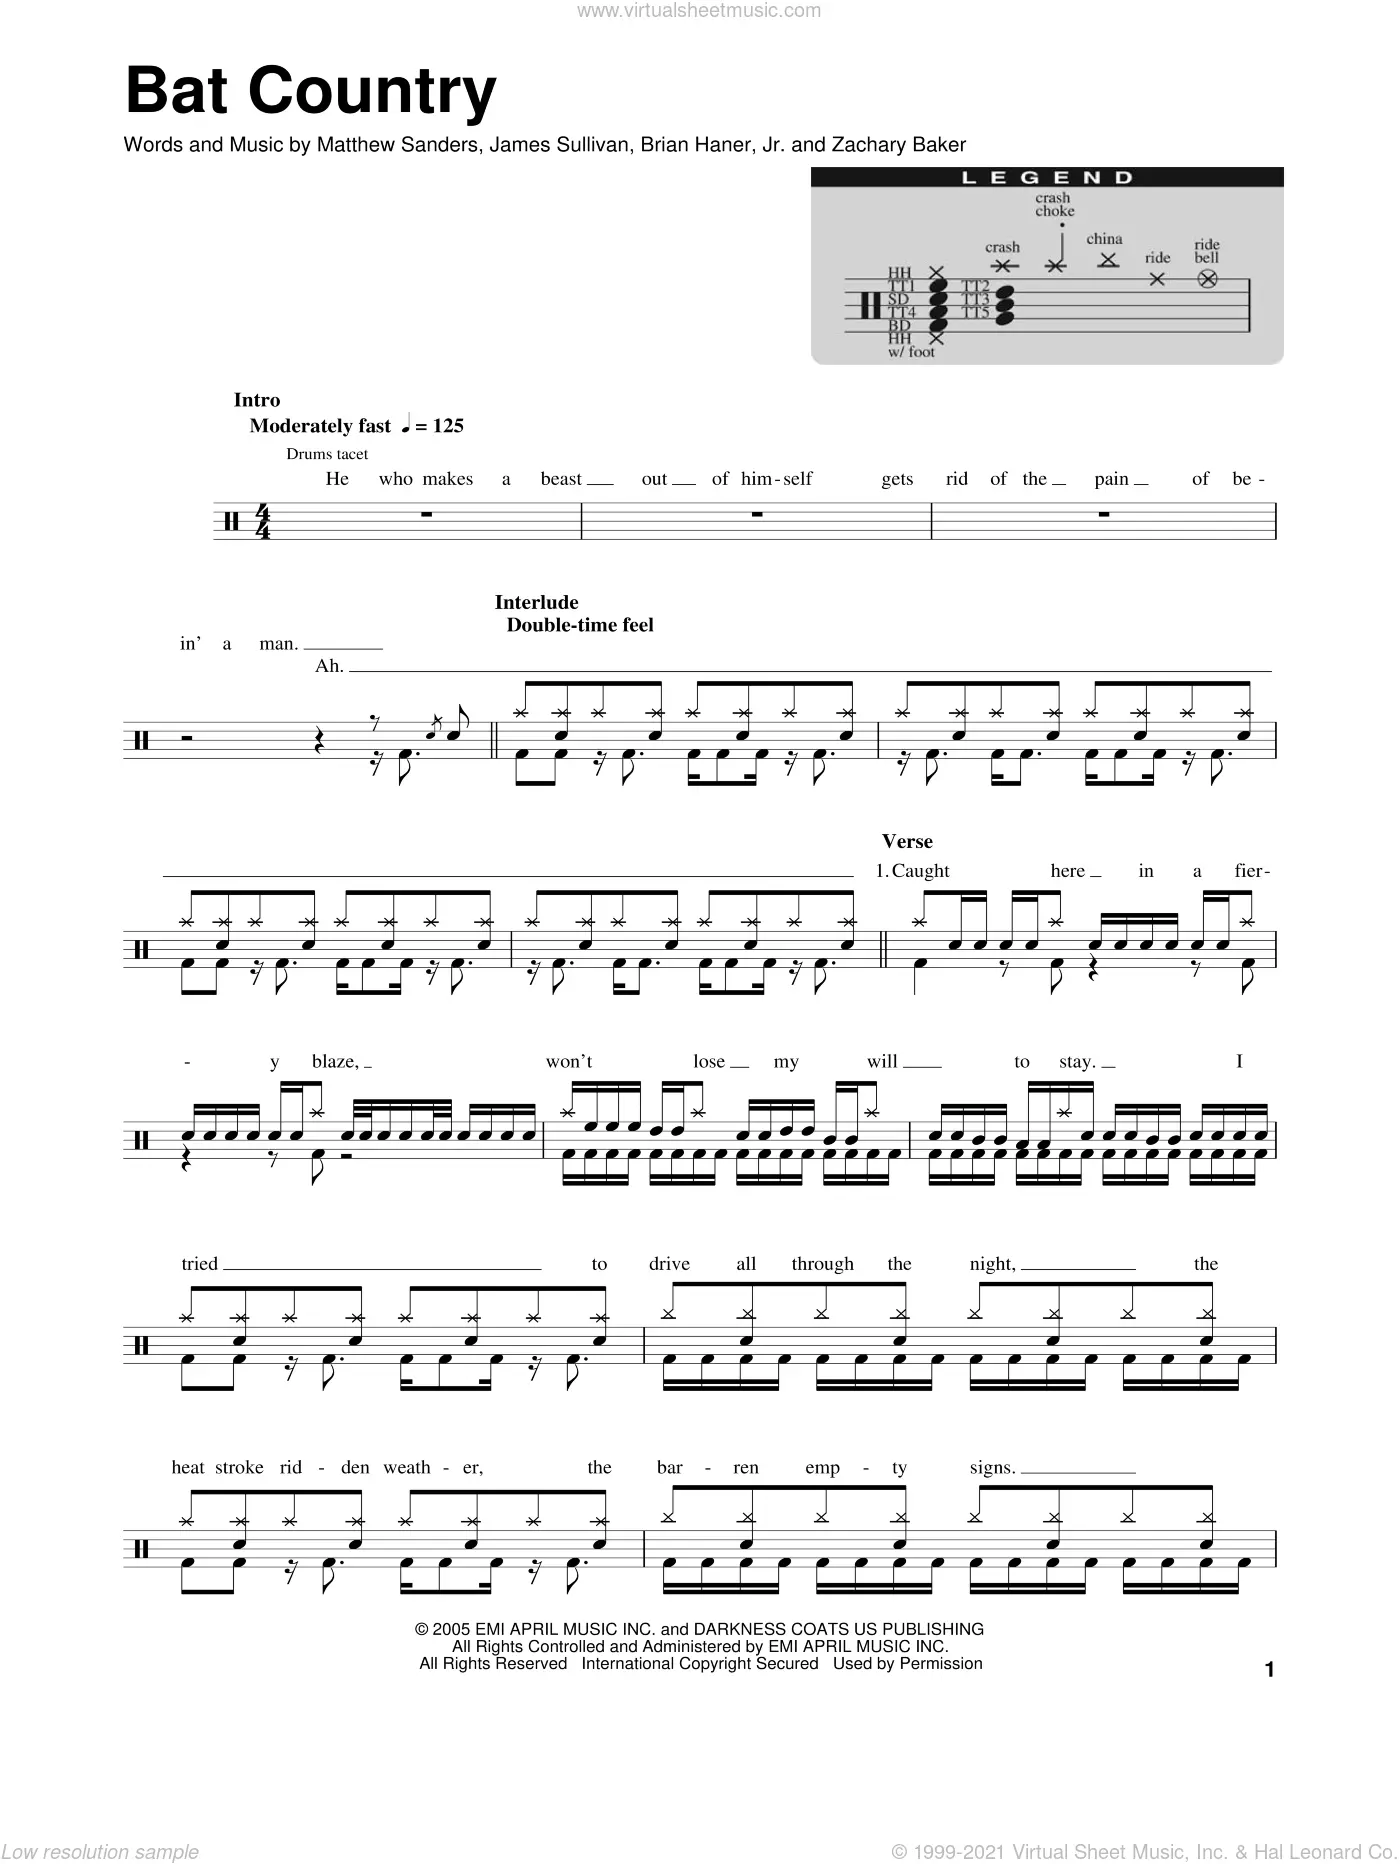 Avenged Sevenfold - Afterlife Sheets by Dadebrayant